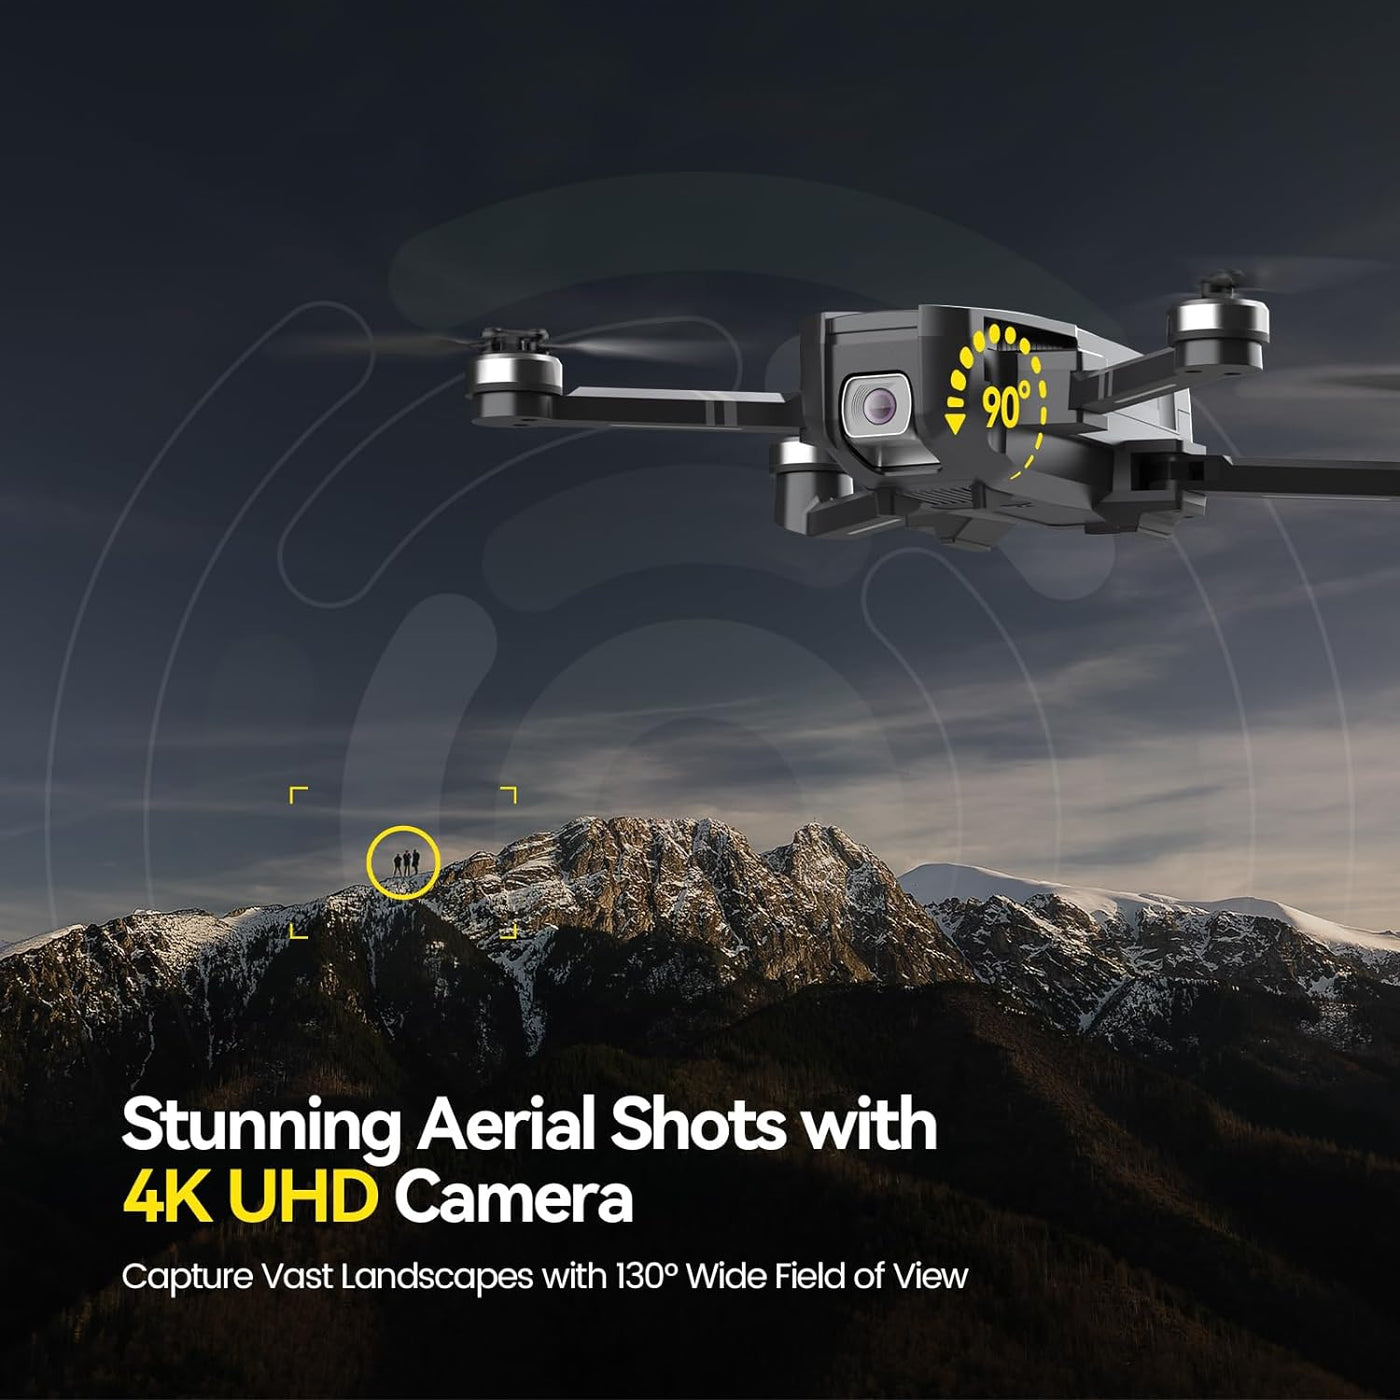 Holy Stone HS720 Foldable GPS Drone with 4K UHD Camera for Adults - $180